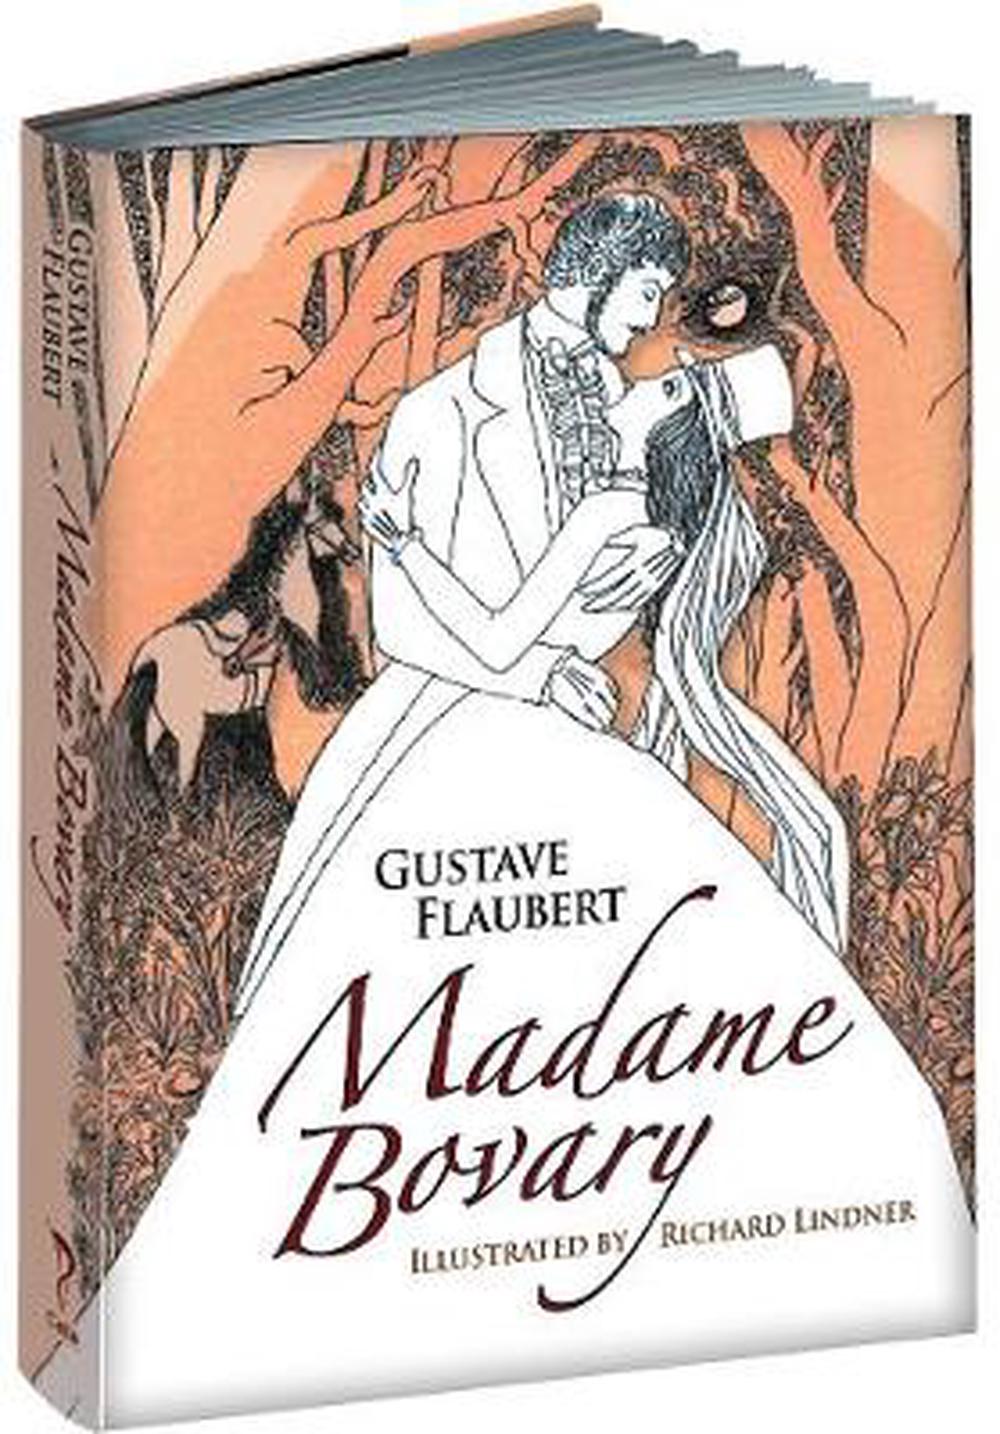 download the last version for ipod Madame Bovary